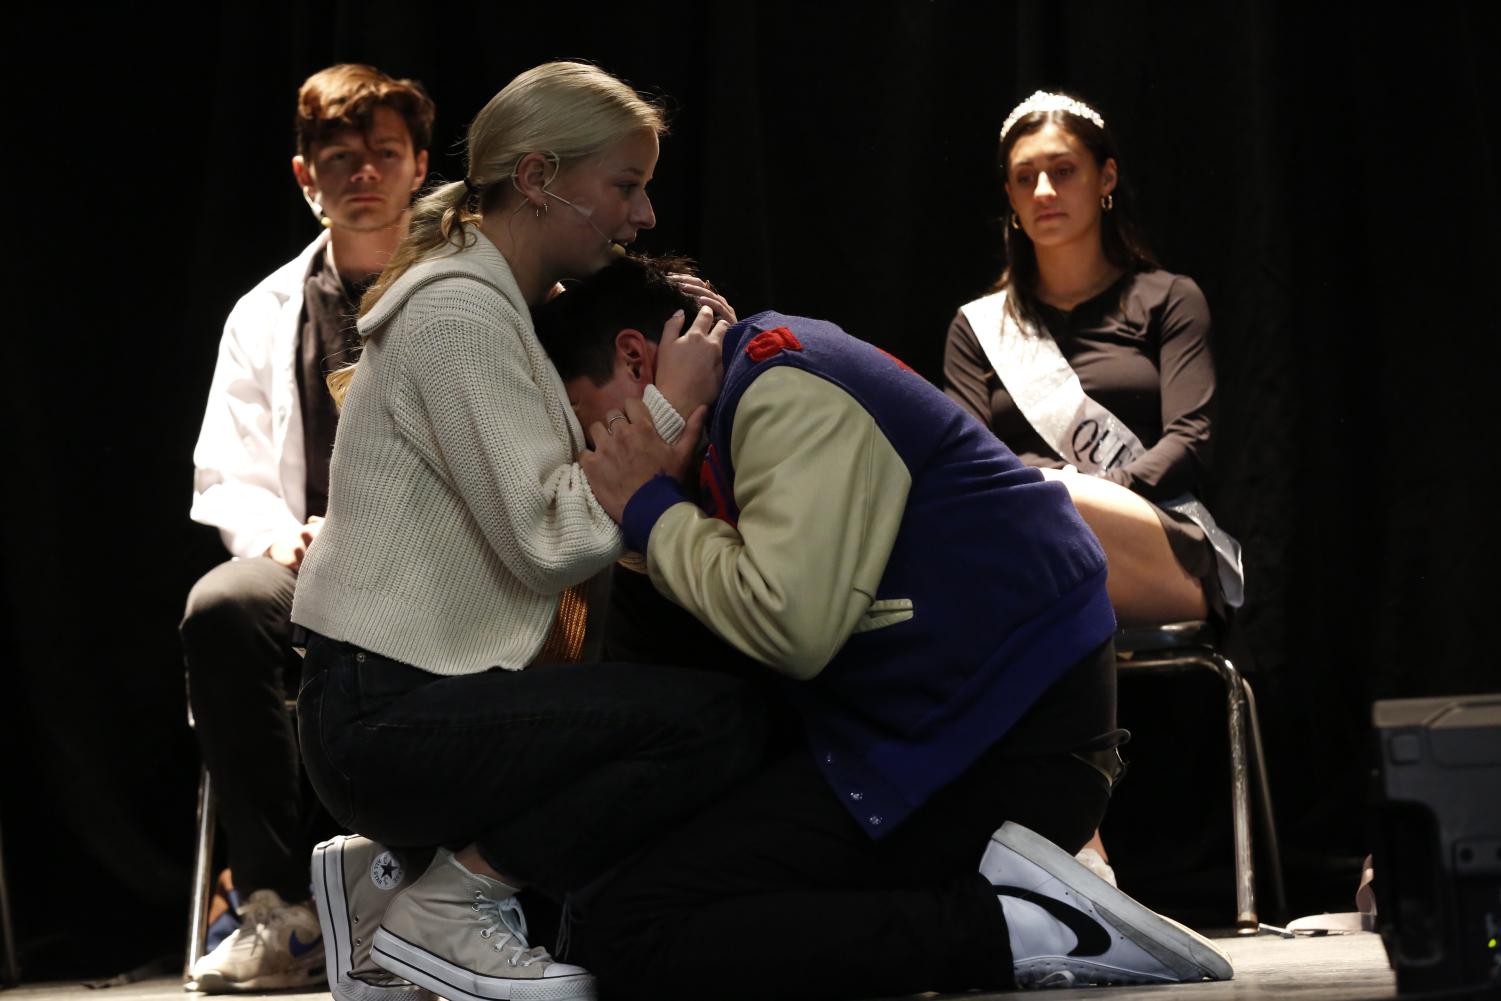 Diego Rodríguez plays an opioid addict in an emotional scene on the start of recovery. He is a main character in a new musical “Painless” about opioid addiction that Becky Brent’s health class saw yesterday in the Craft Theater. “[He] took pride in being an athlete, and when [he] lost that, [he] kind of lost everything,” Rodríguez said.